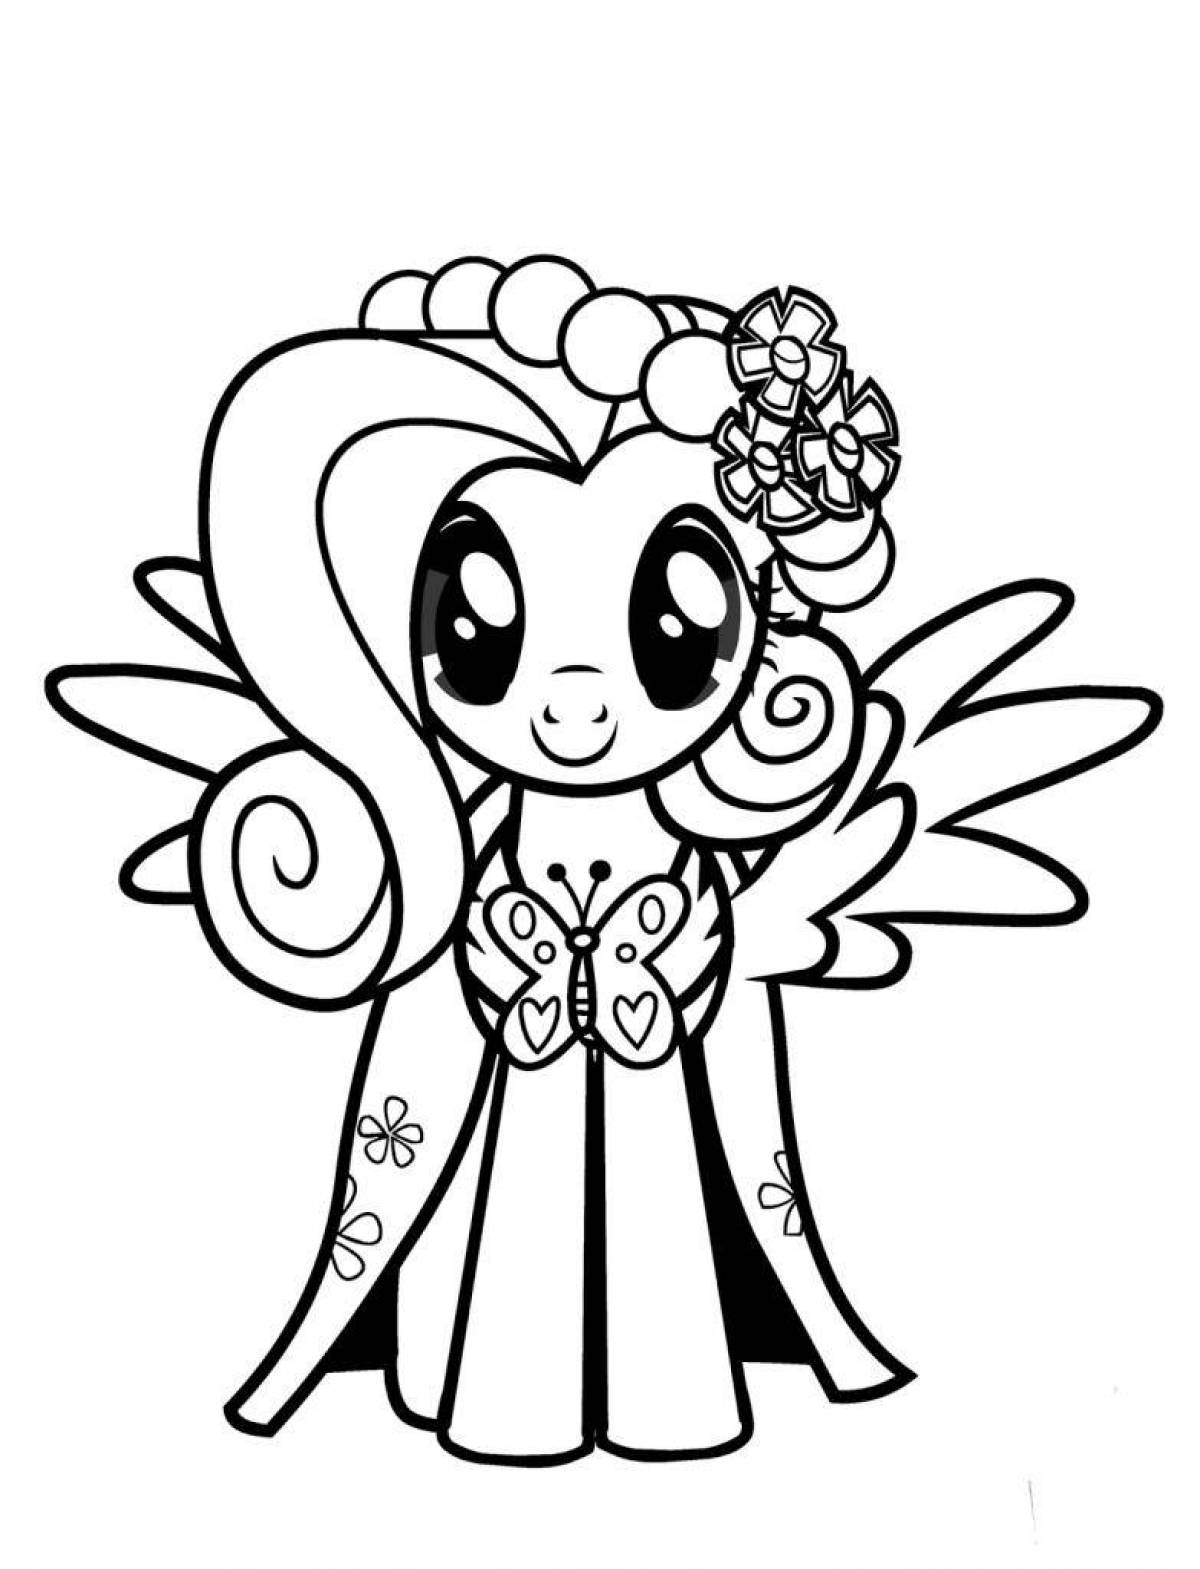 Watershine pony coloring page